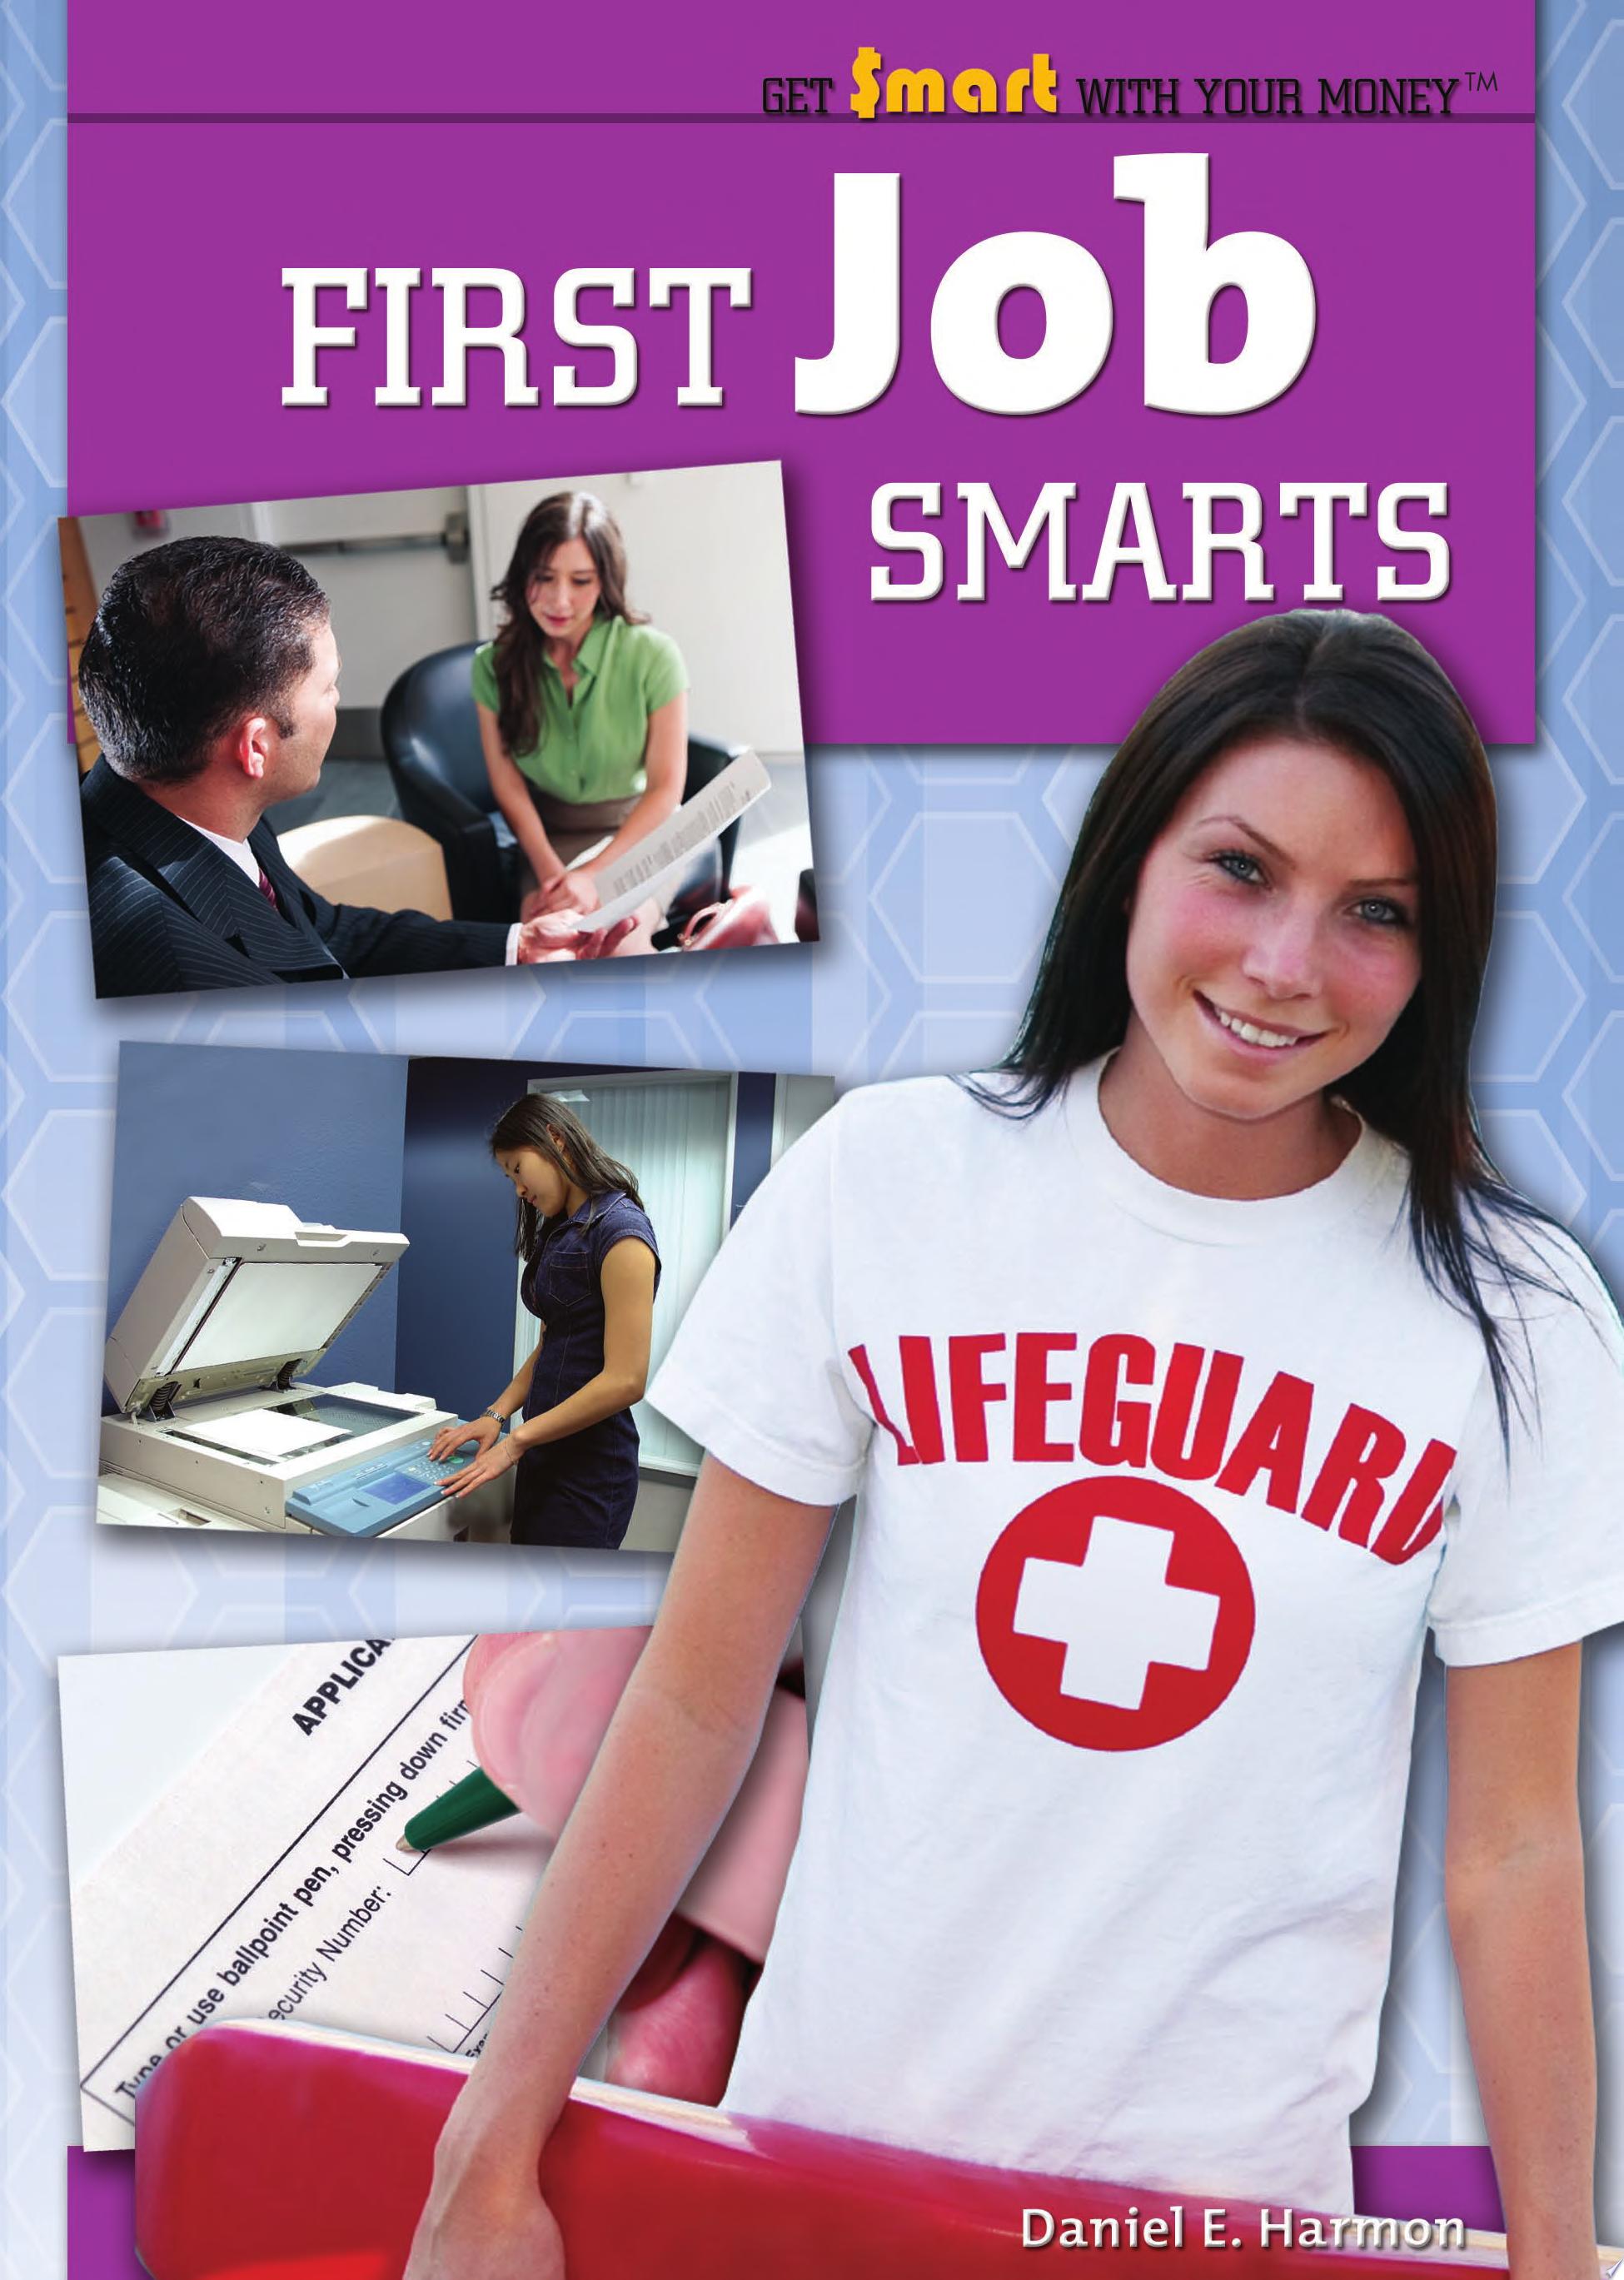 Image for "First Job Smarts"